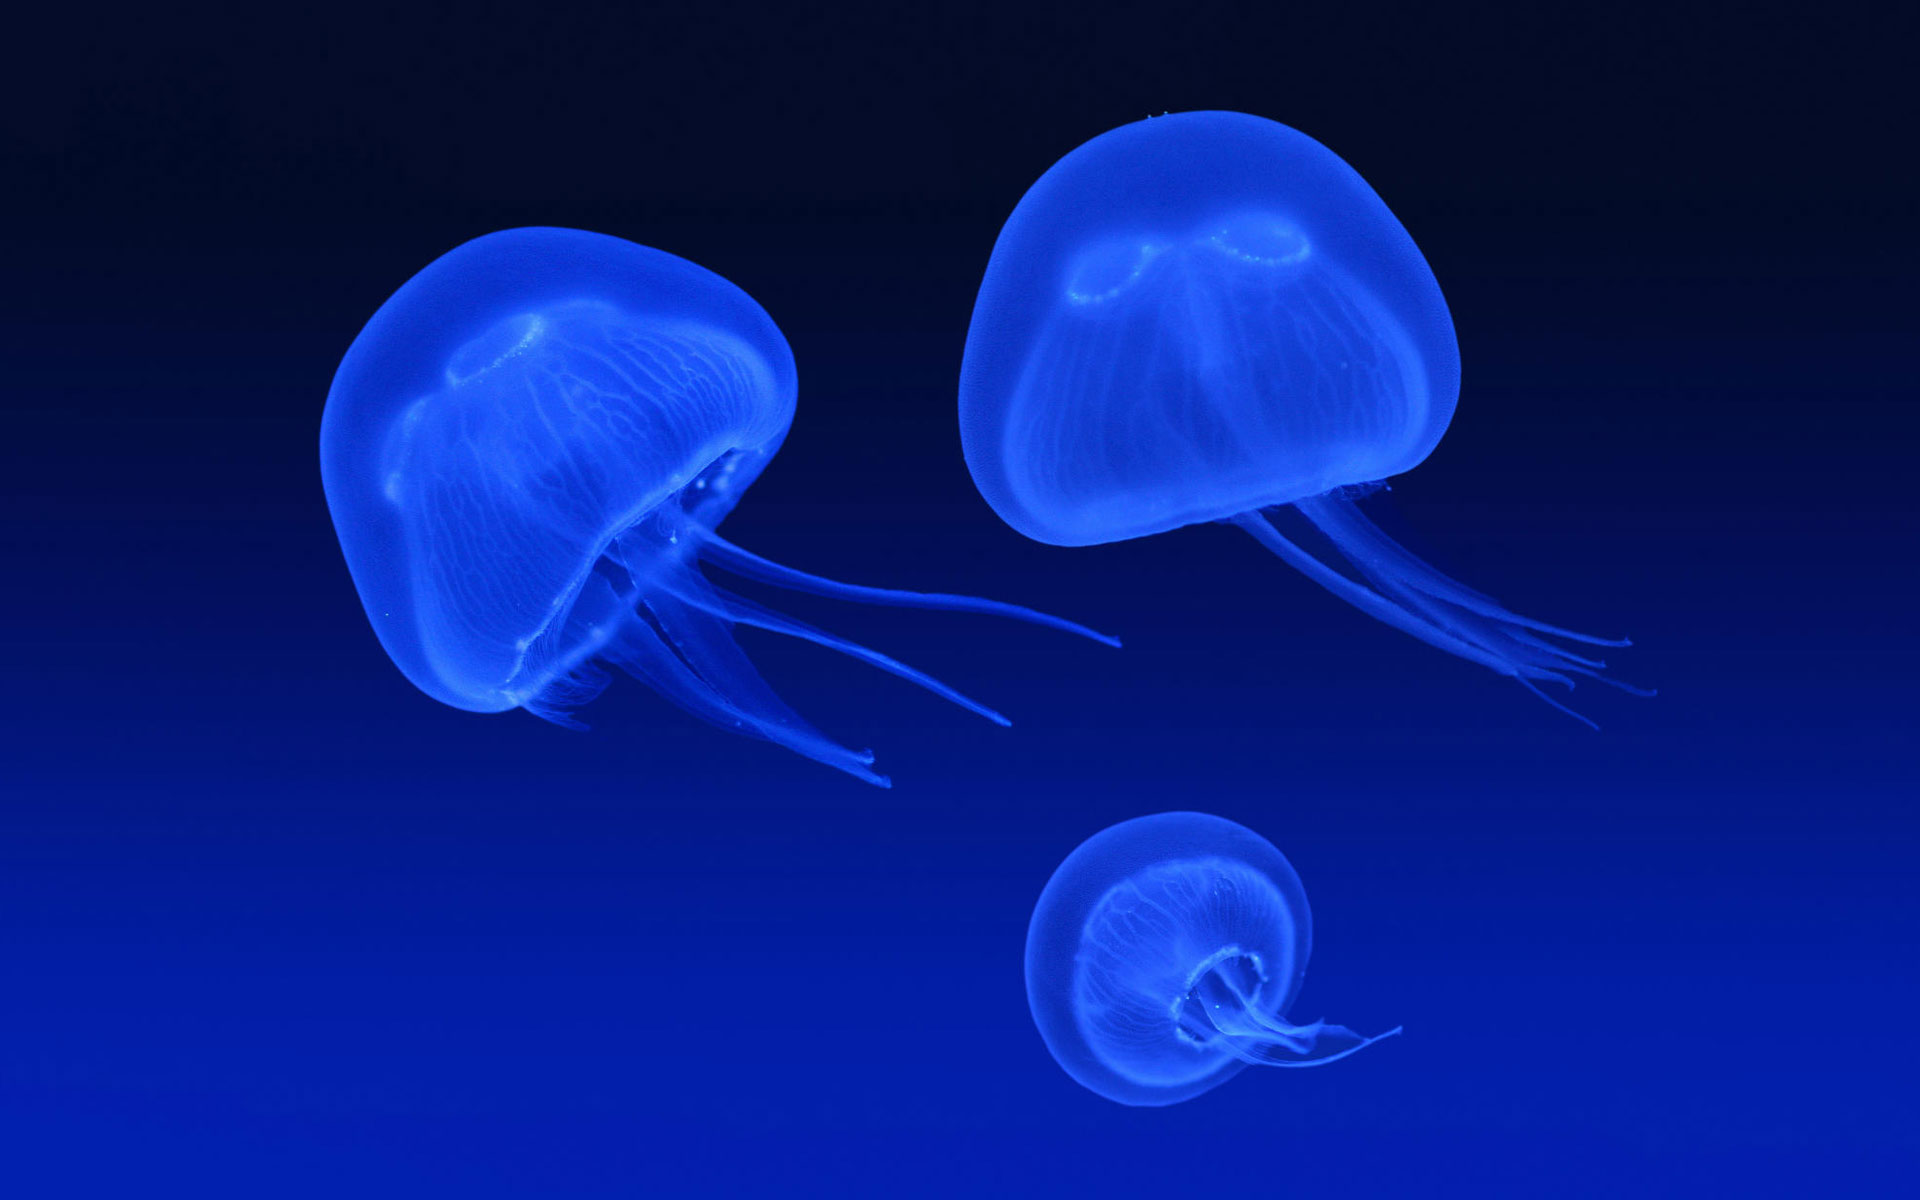 Floating Jellyfish331299428 - Floating Jellyfish - Jellyfish, Floating, 1080p